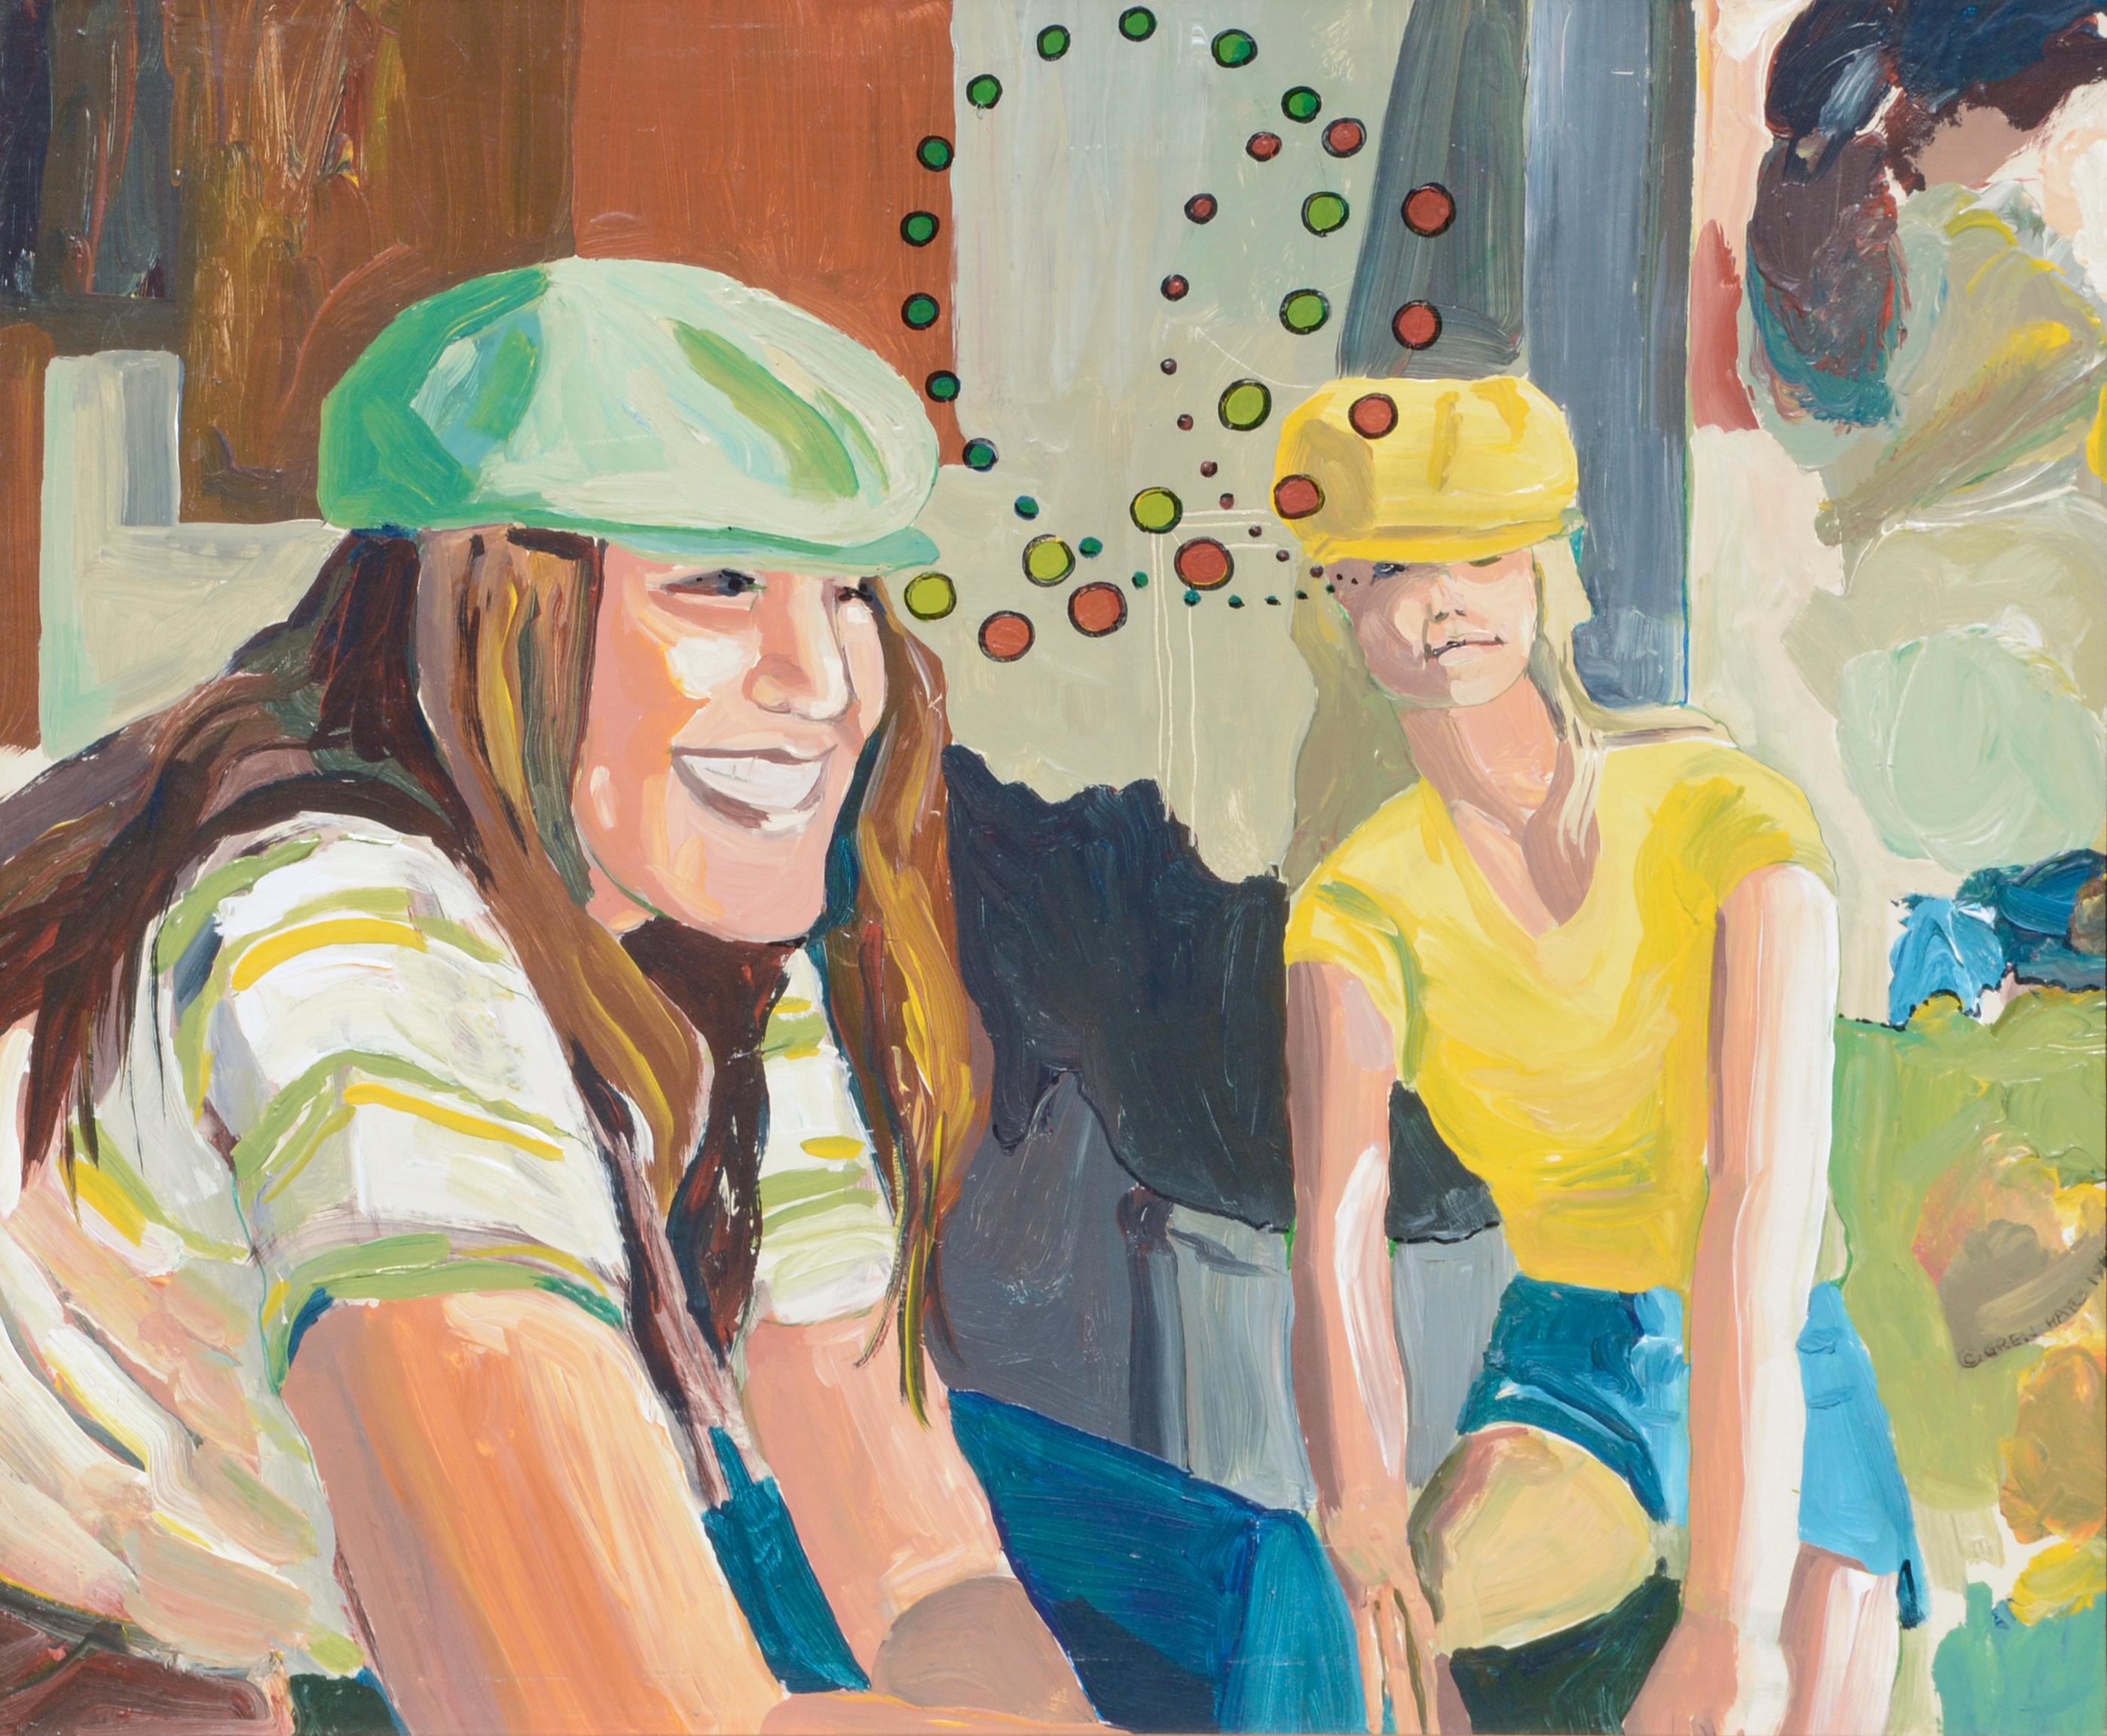 Cyclists in Love, Bay Area Figurative Movement - Painting by Patricia Gren Hayes